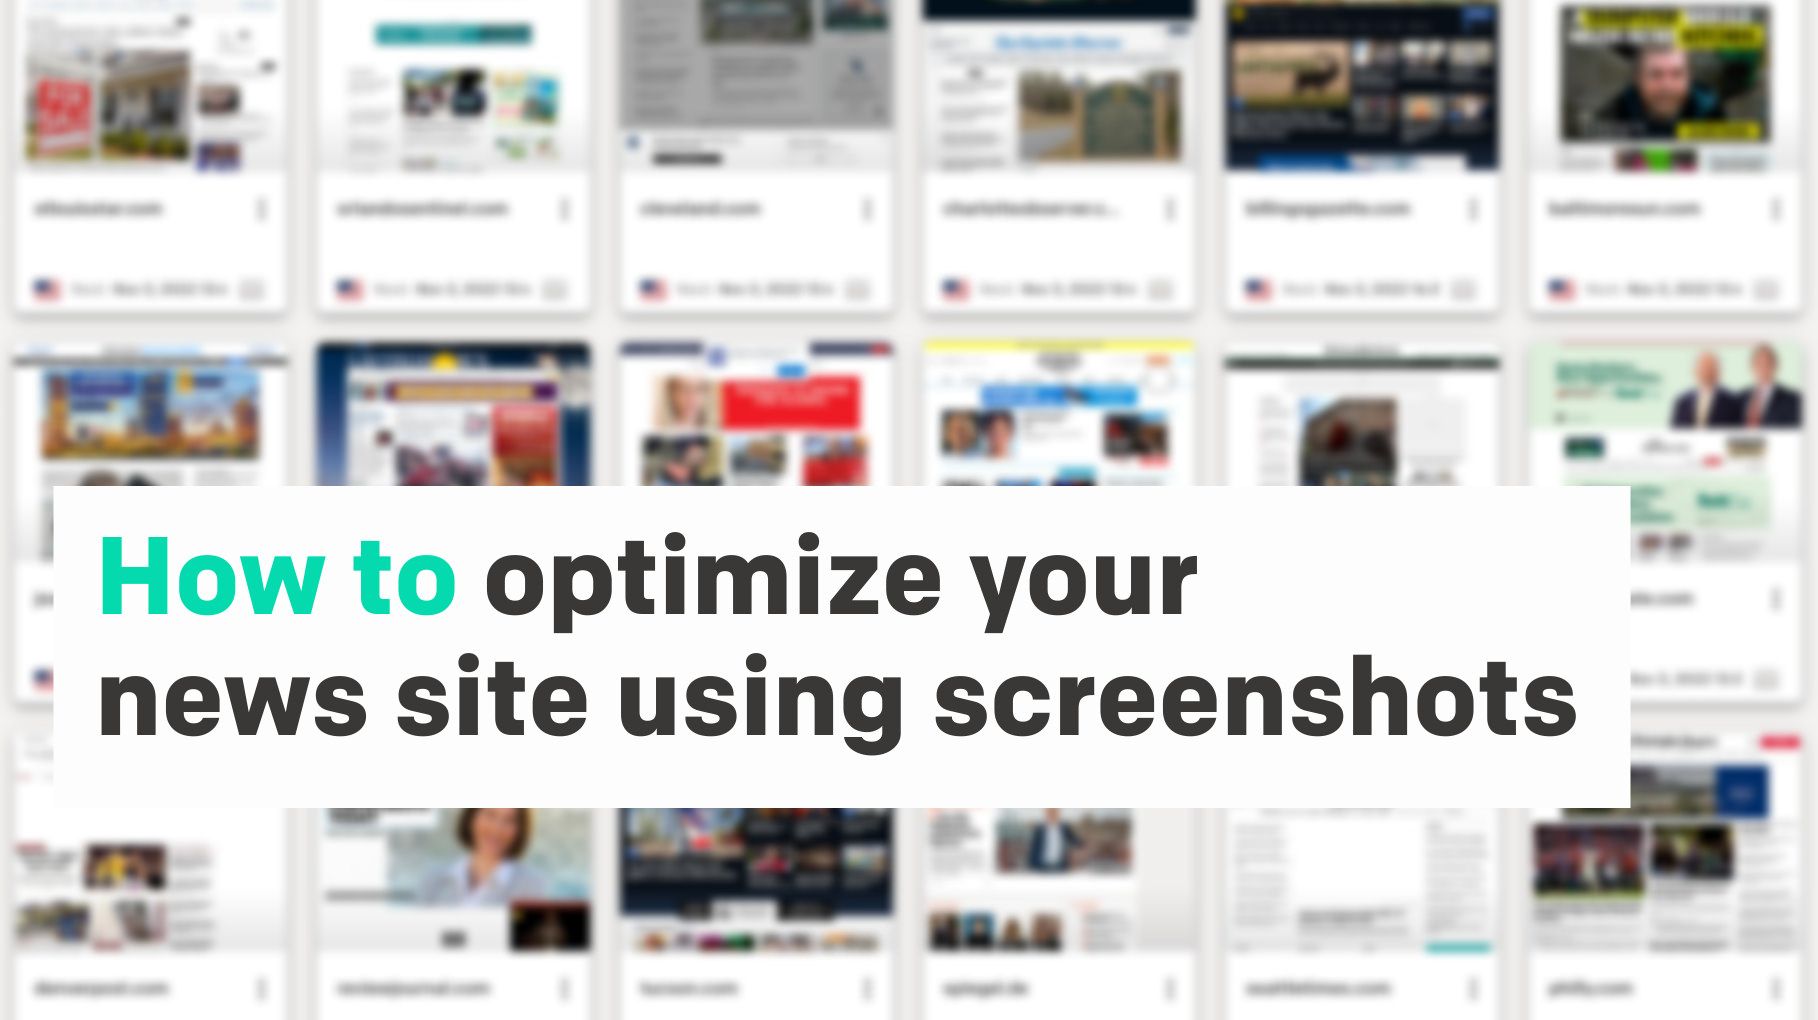 How to optimize your news site using screenshots